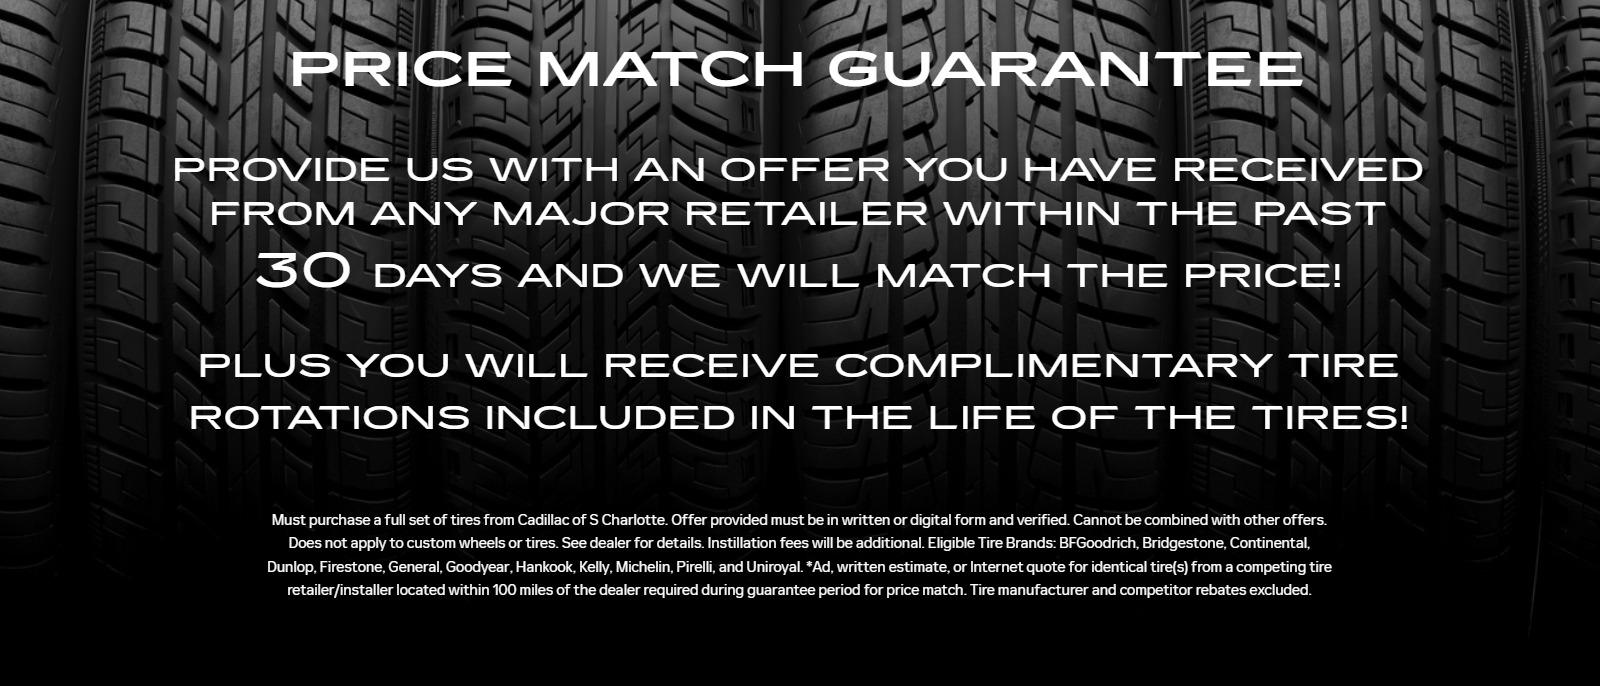 • Price Match Guarantee
• Provide us with an offer you have received from any major retailer within the past 30 days and we will match the price!
• Plus you will receive Complimentary Tire Rotations included in the life of the Tires!